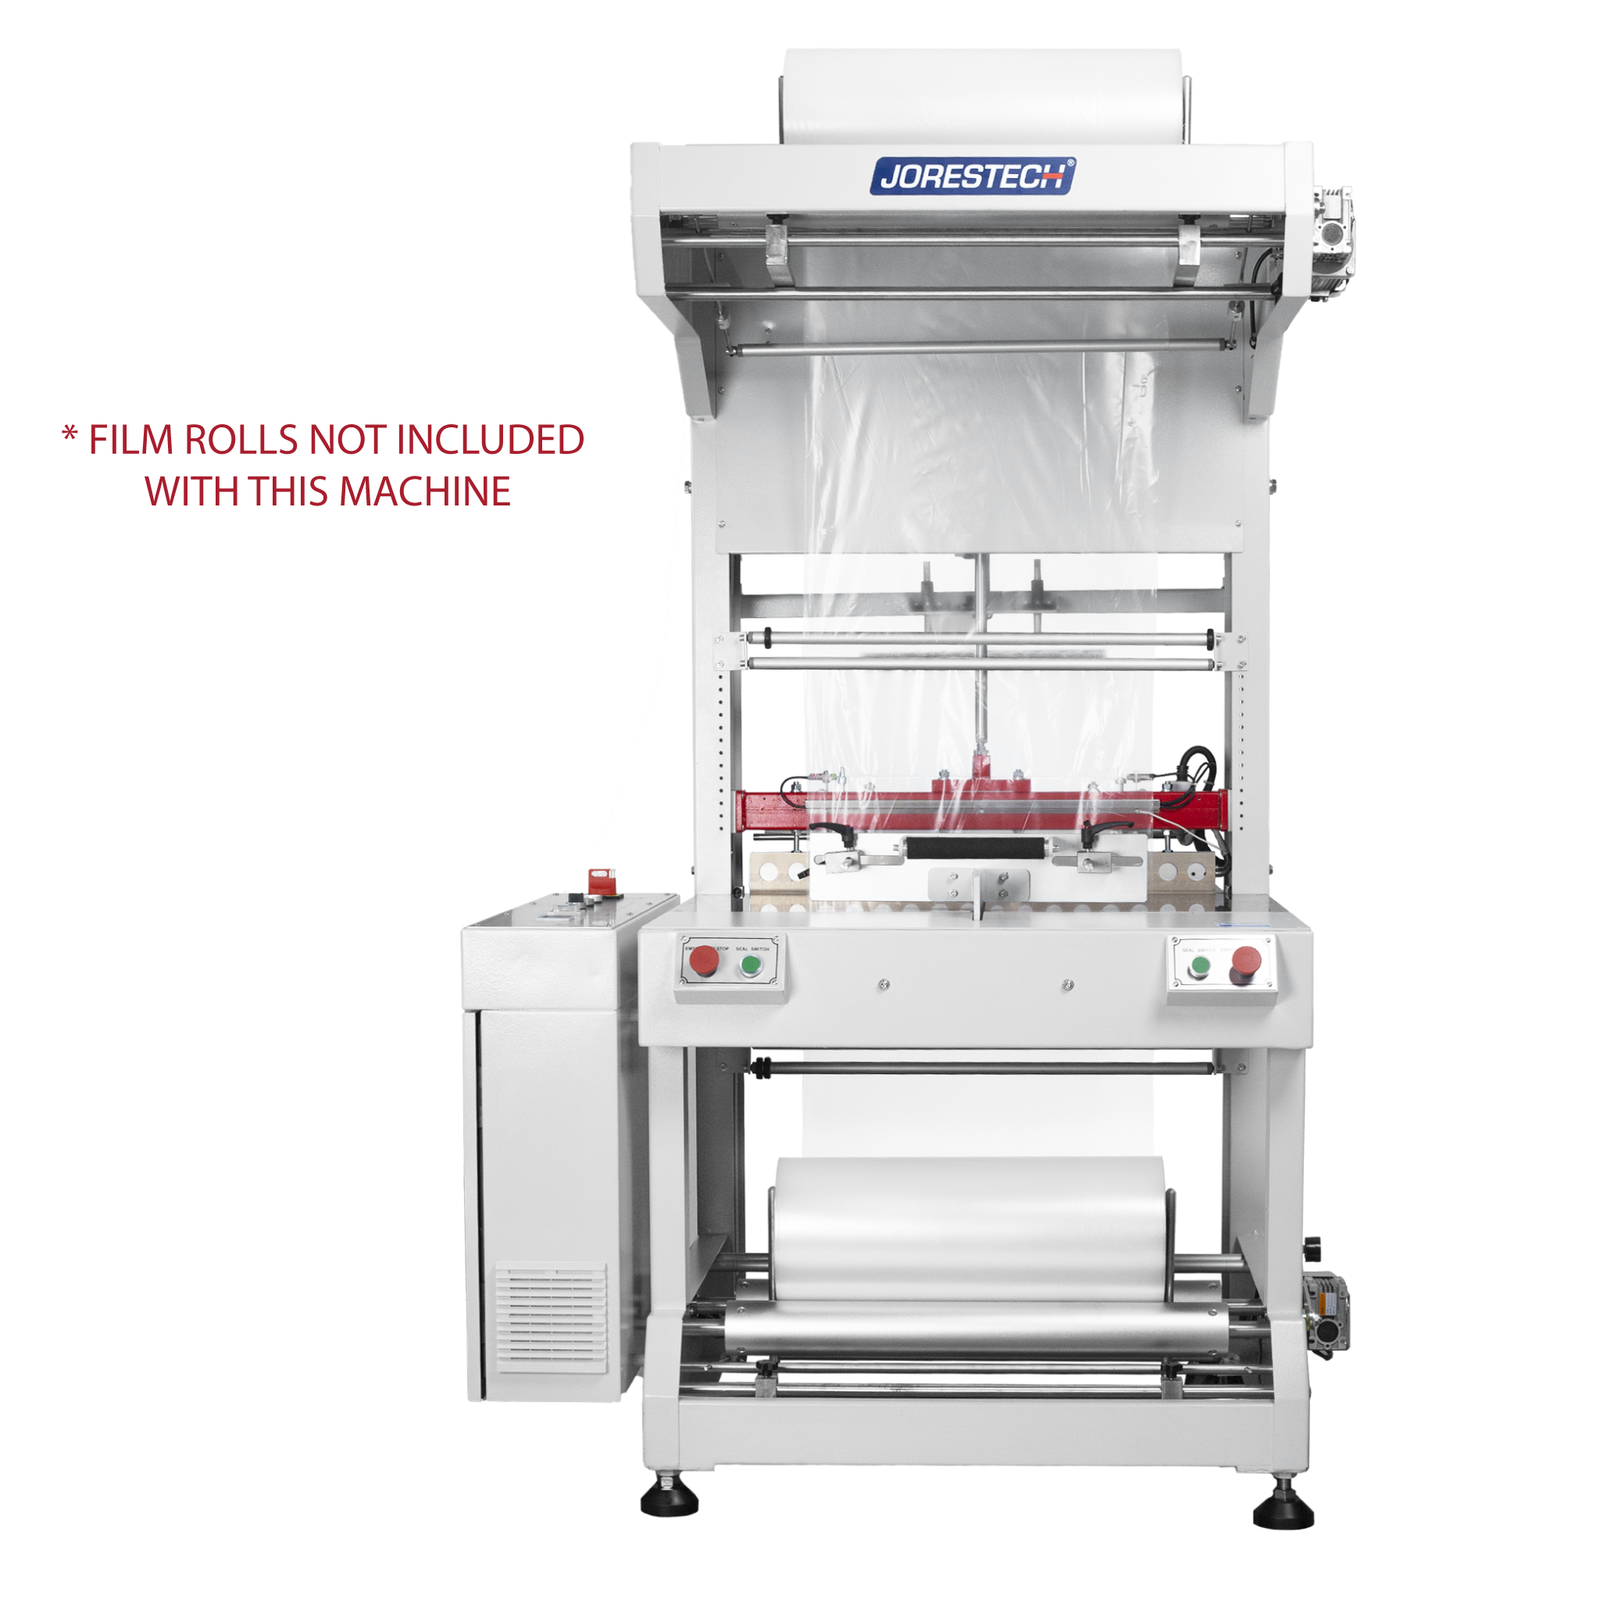 JORESTECH semi automatic sleeve film sealer shown in a frontal view over white background. Theres a red text that reads “film rolls not included with this machine”